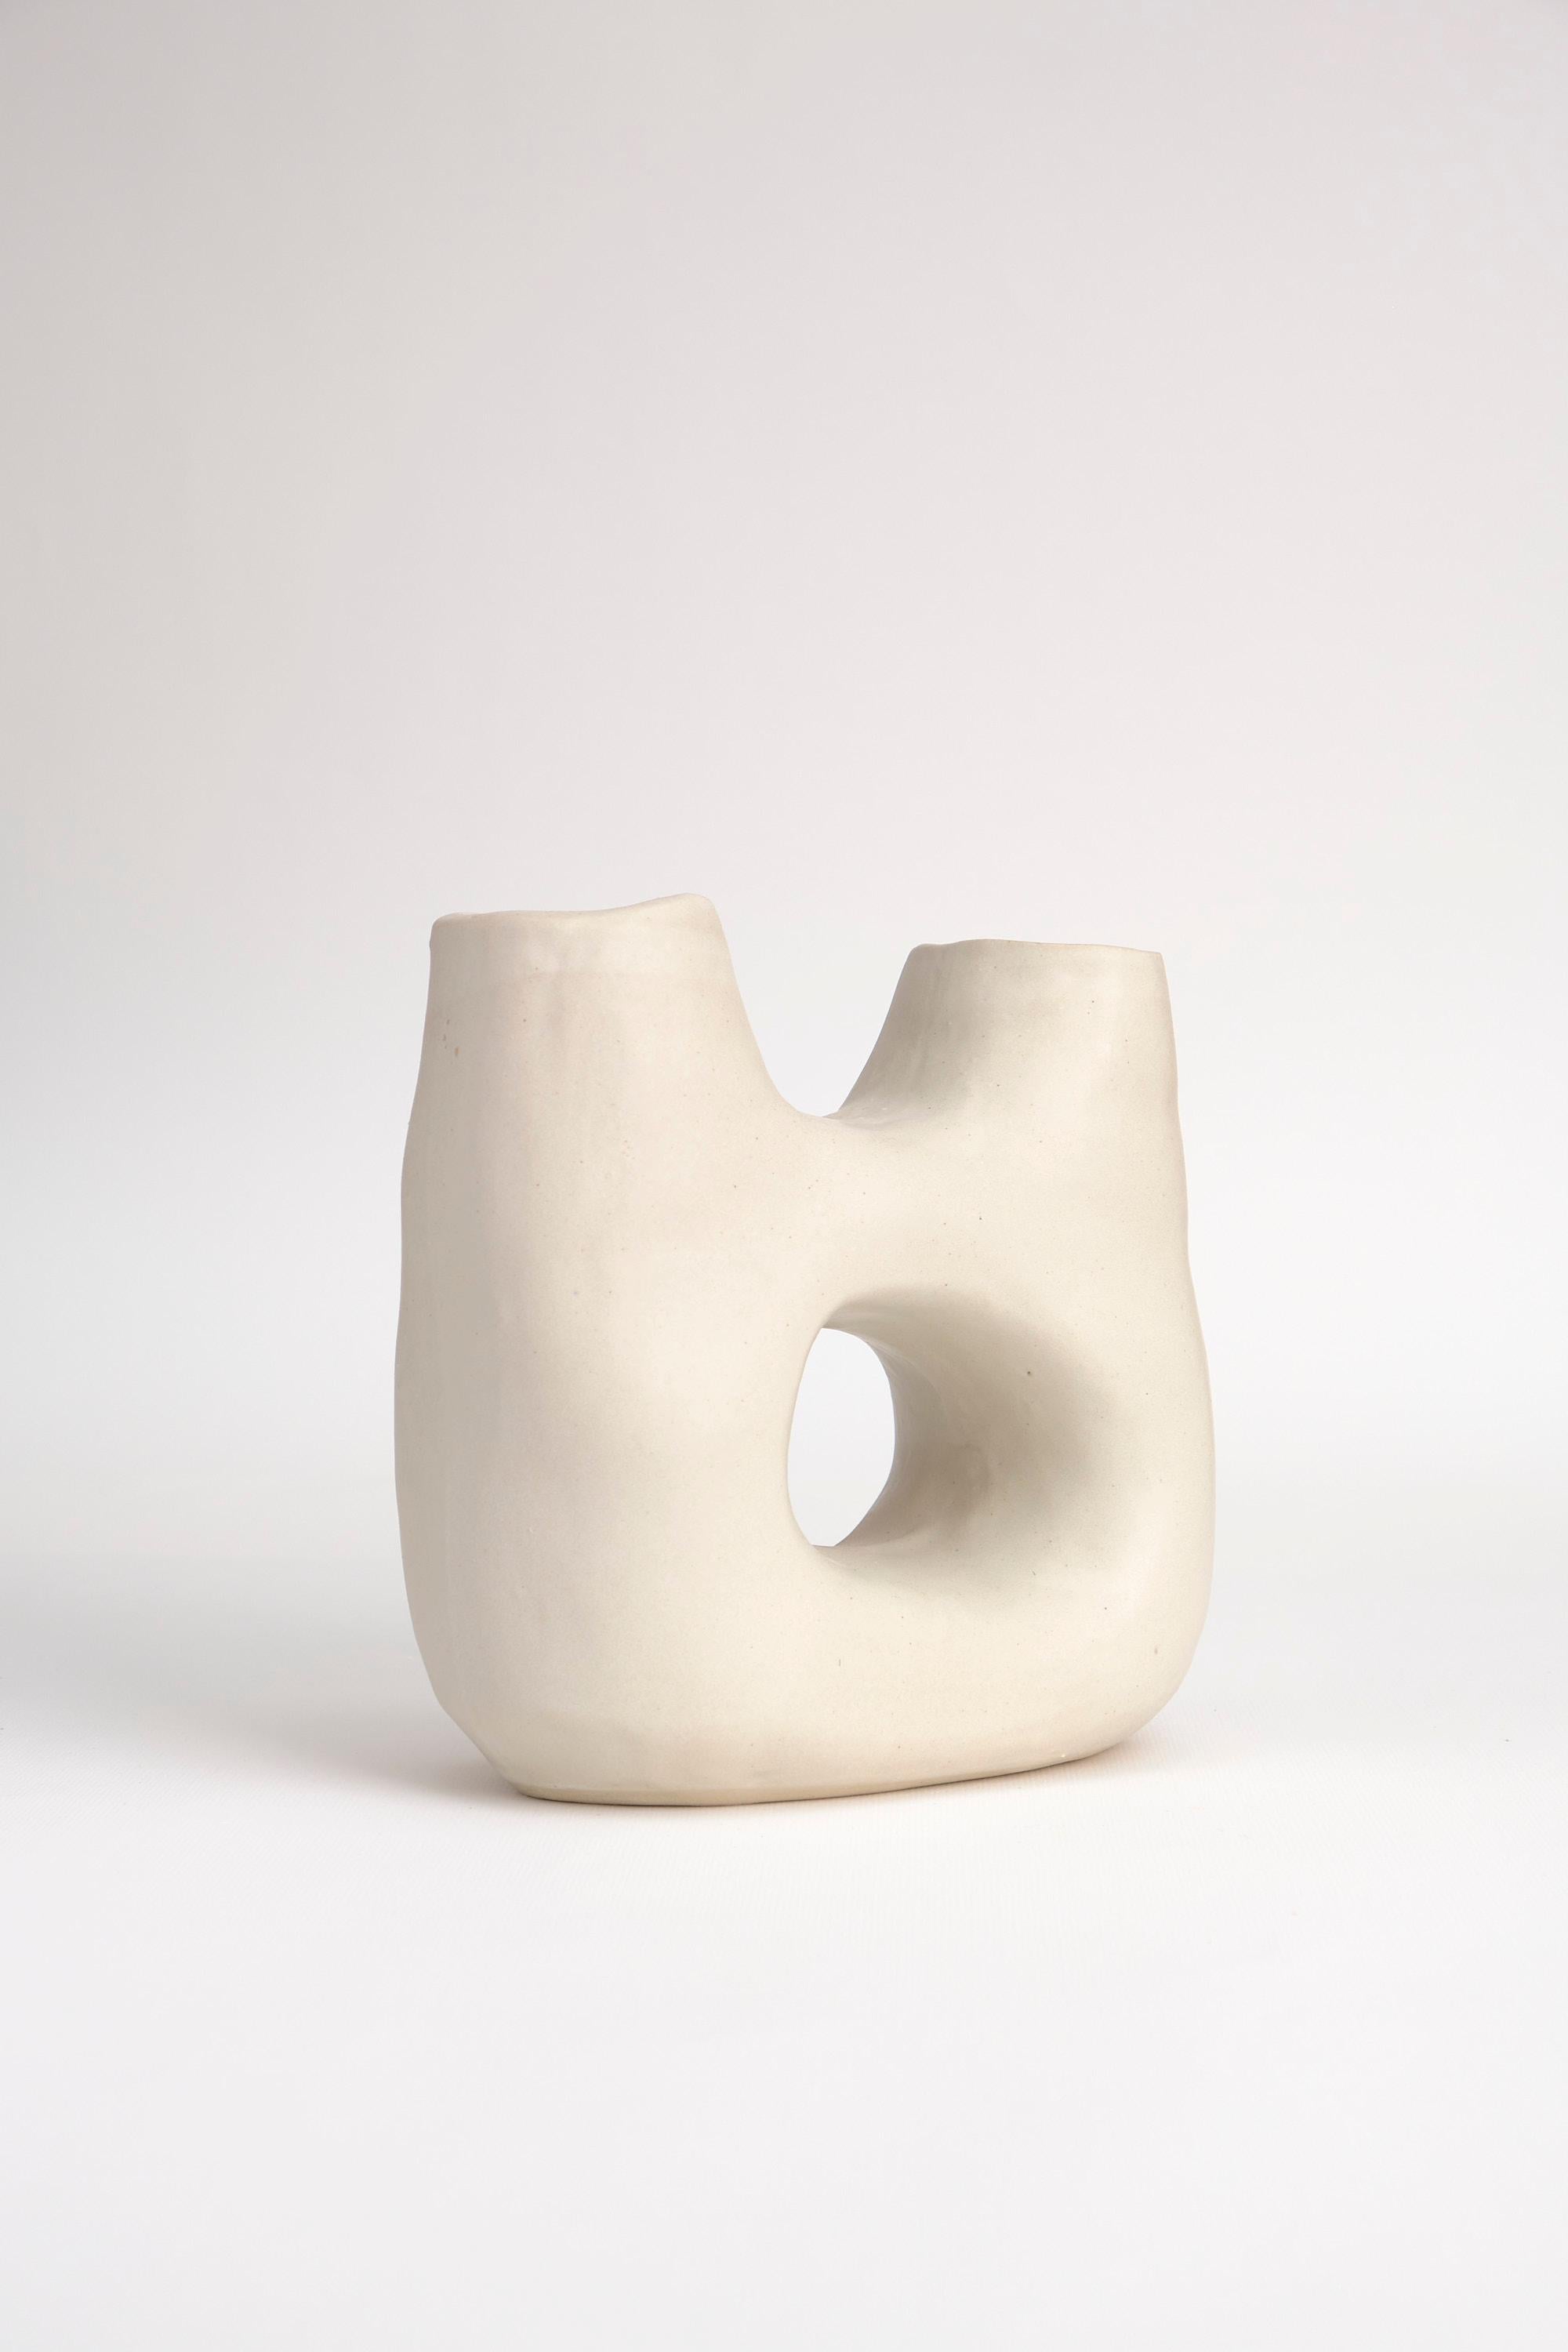 Ceramic sculptural vase from the permanent collection.

Dimensions: 19 x 9 x 18.